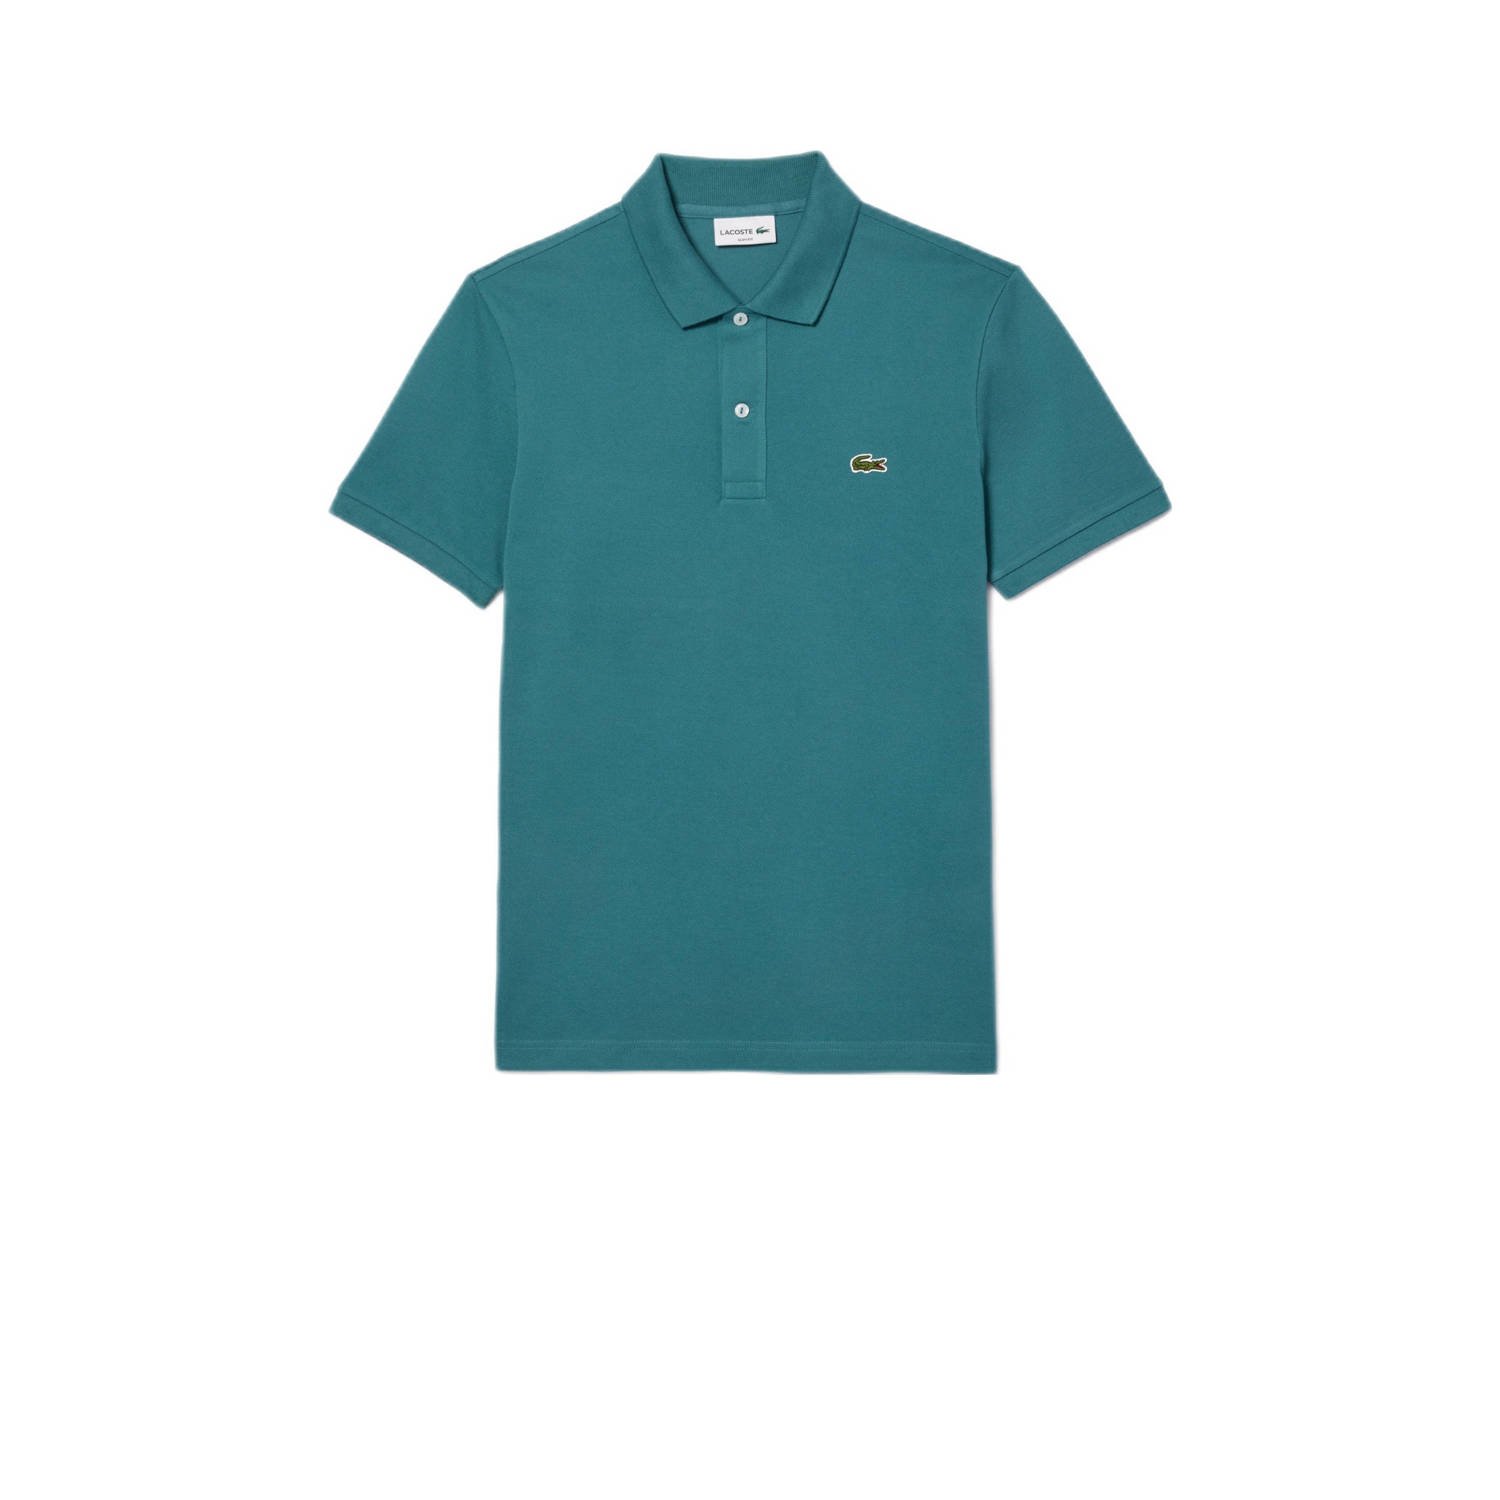 LACOSTE Heren Polo's & T-shirts 1hp3 Men's s Polo 01 Petrol